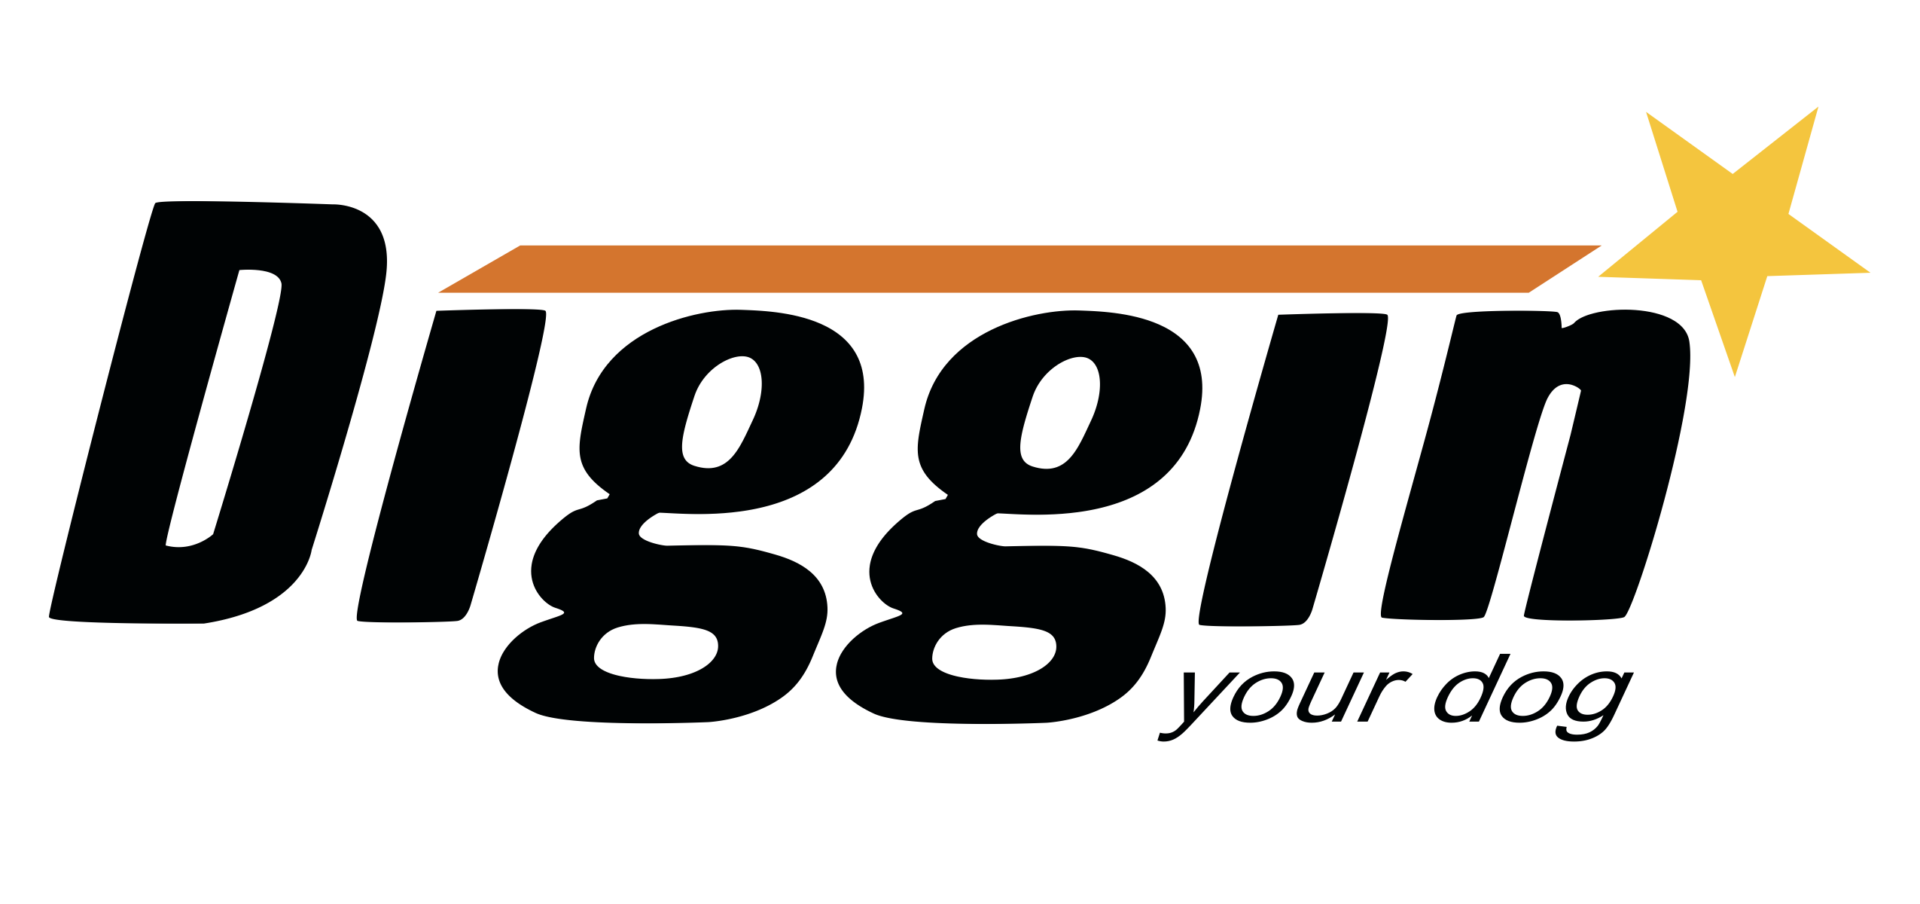 A logo of the company diggit.